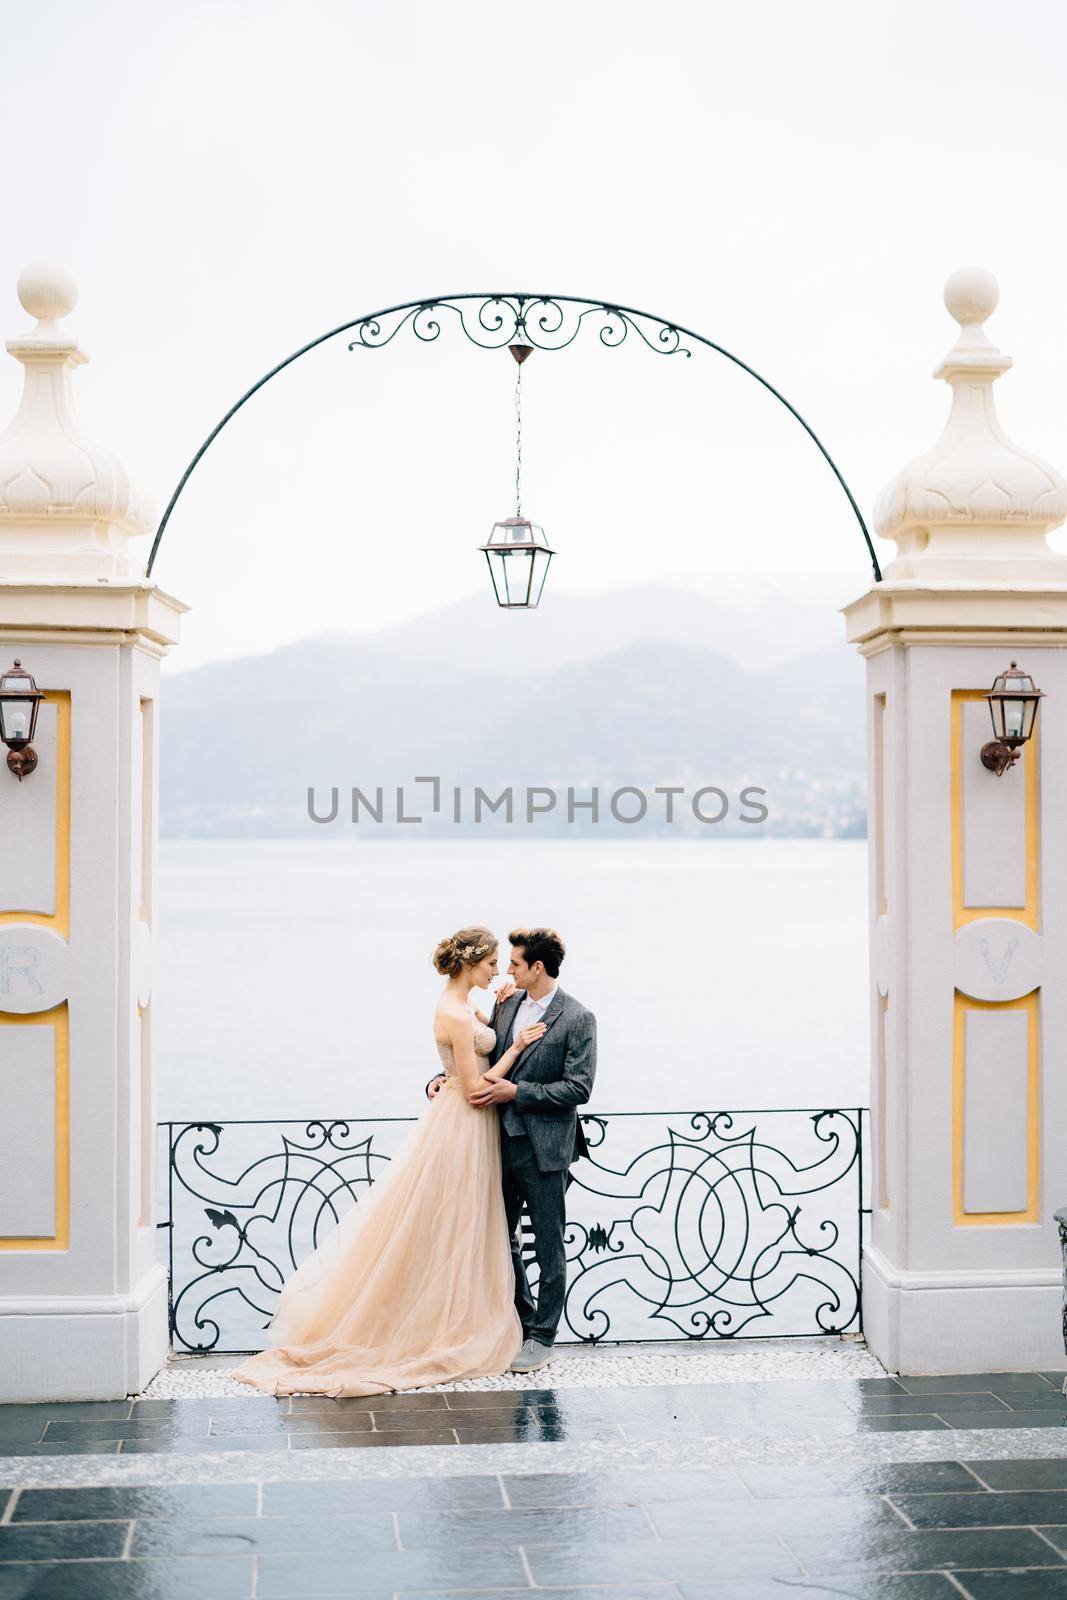 Newlyweds stand in an embrace under an ancient arch leaning on a forged fence against the backdrop of Lake Como by Nadtochiy